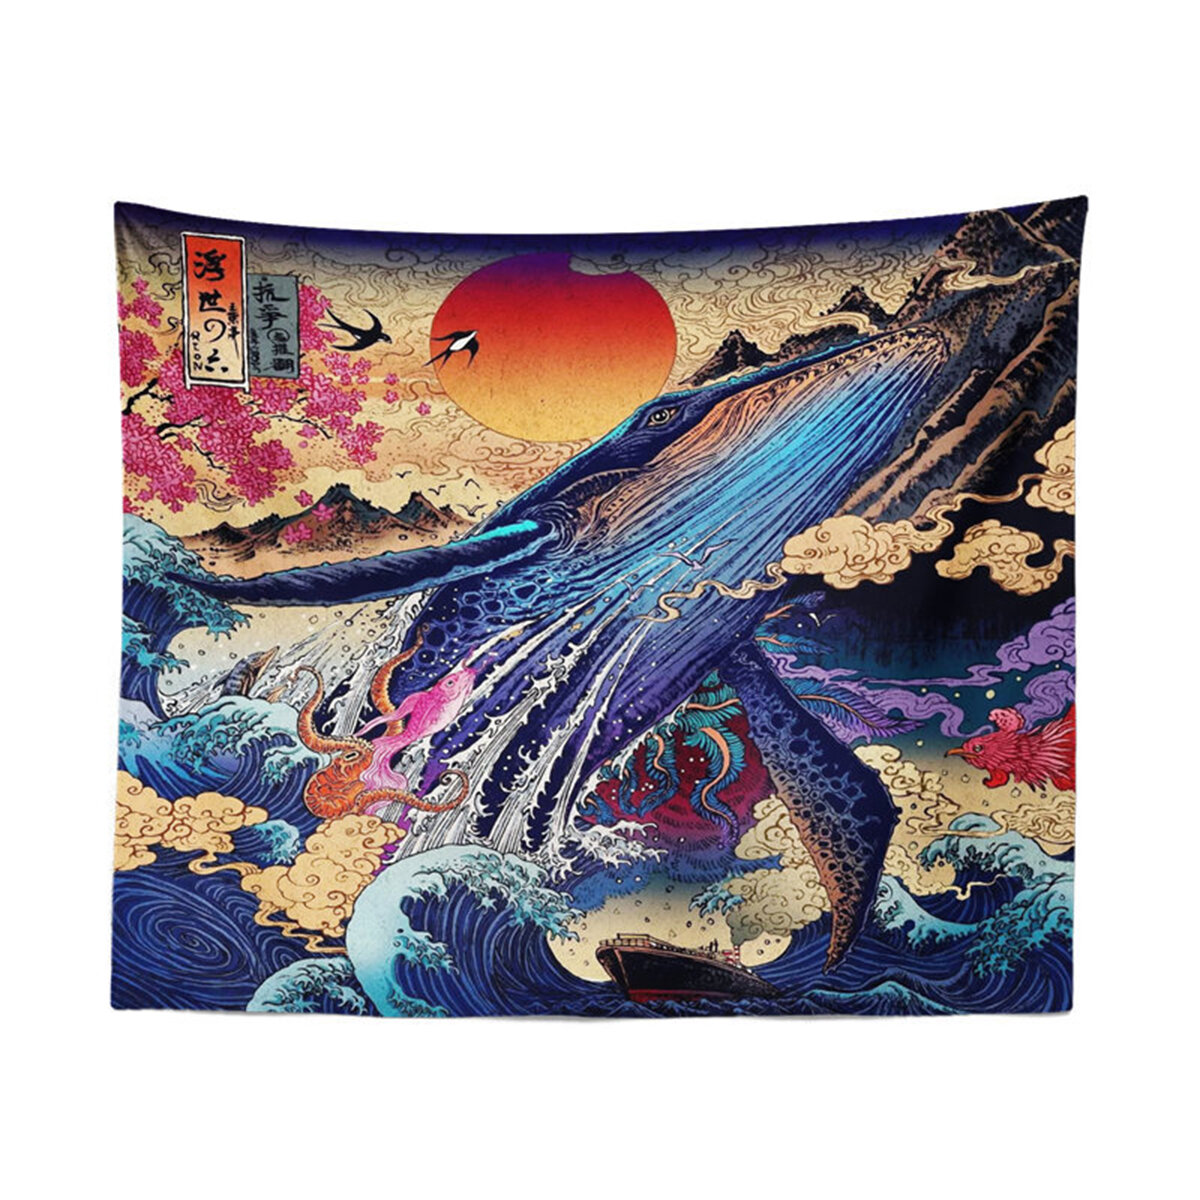 3D Wall Tapestry Great Japanese Sea Ocean Wave Whale Sunset Wall Hanging Blanket Home Living Room De